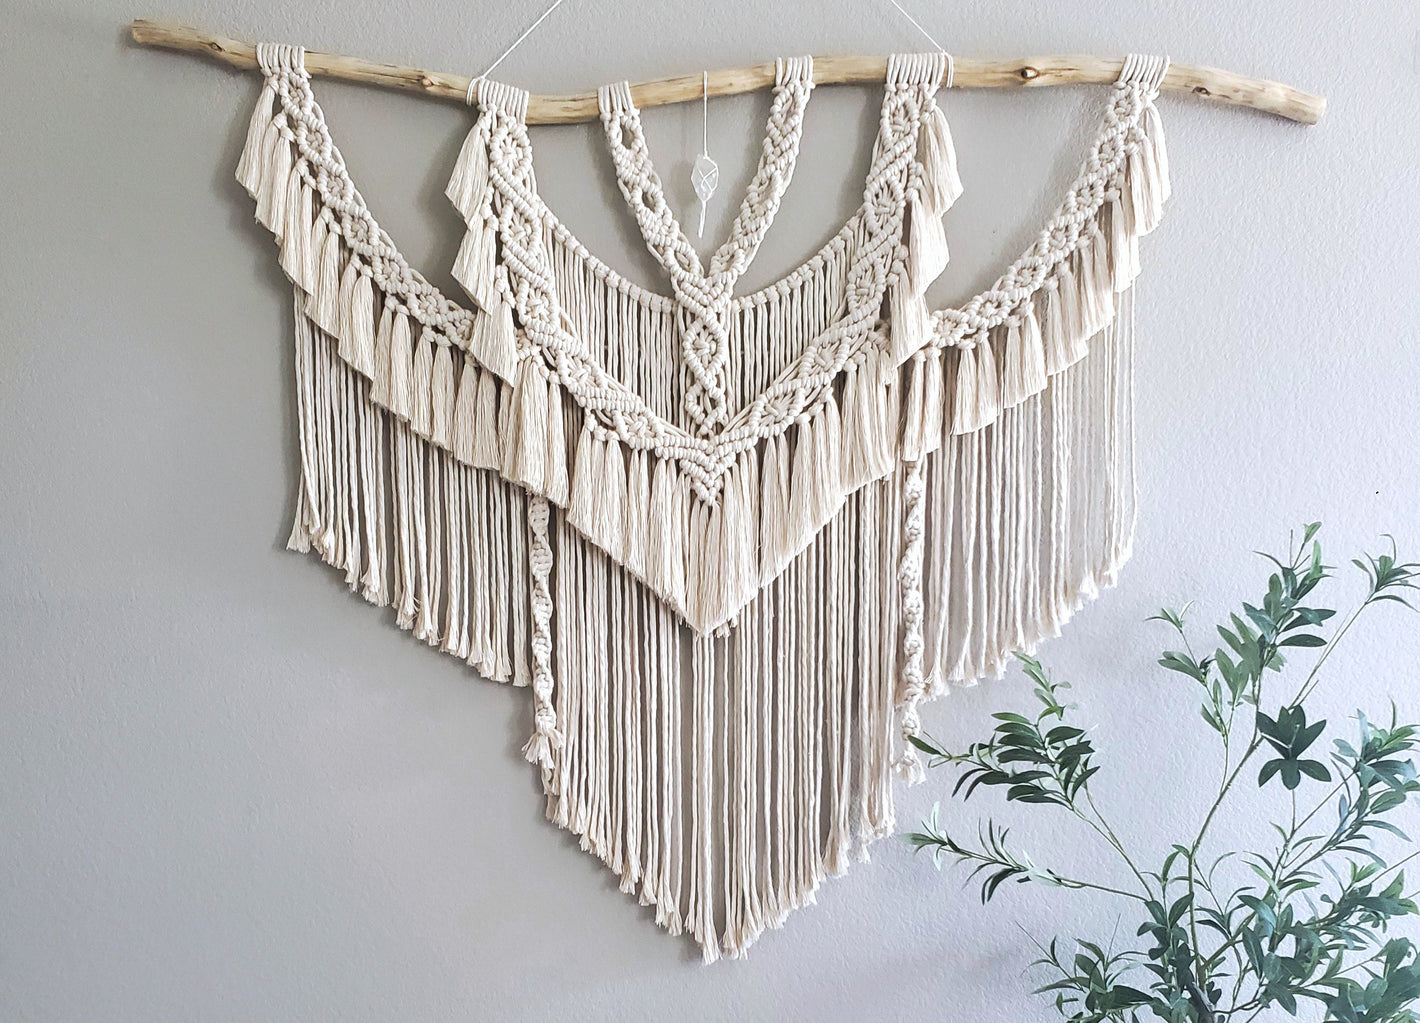 This was the most beautiful wall hanging i've ever seen! It was so soft and its so nice to know it was all eco-frindly!